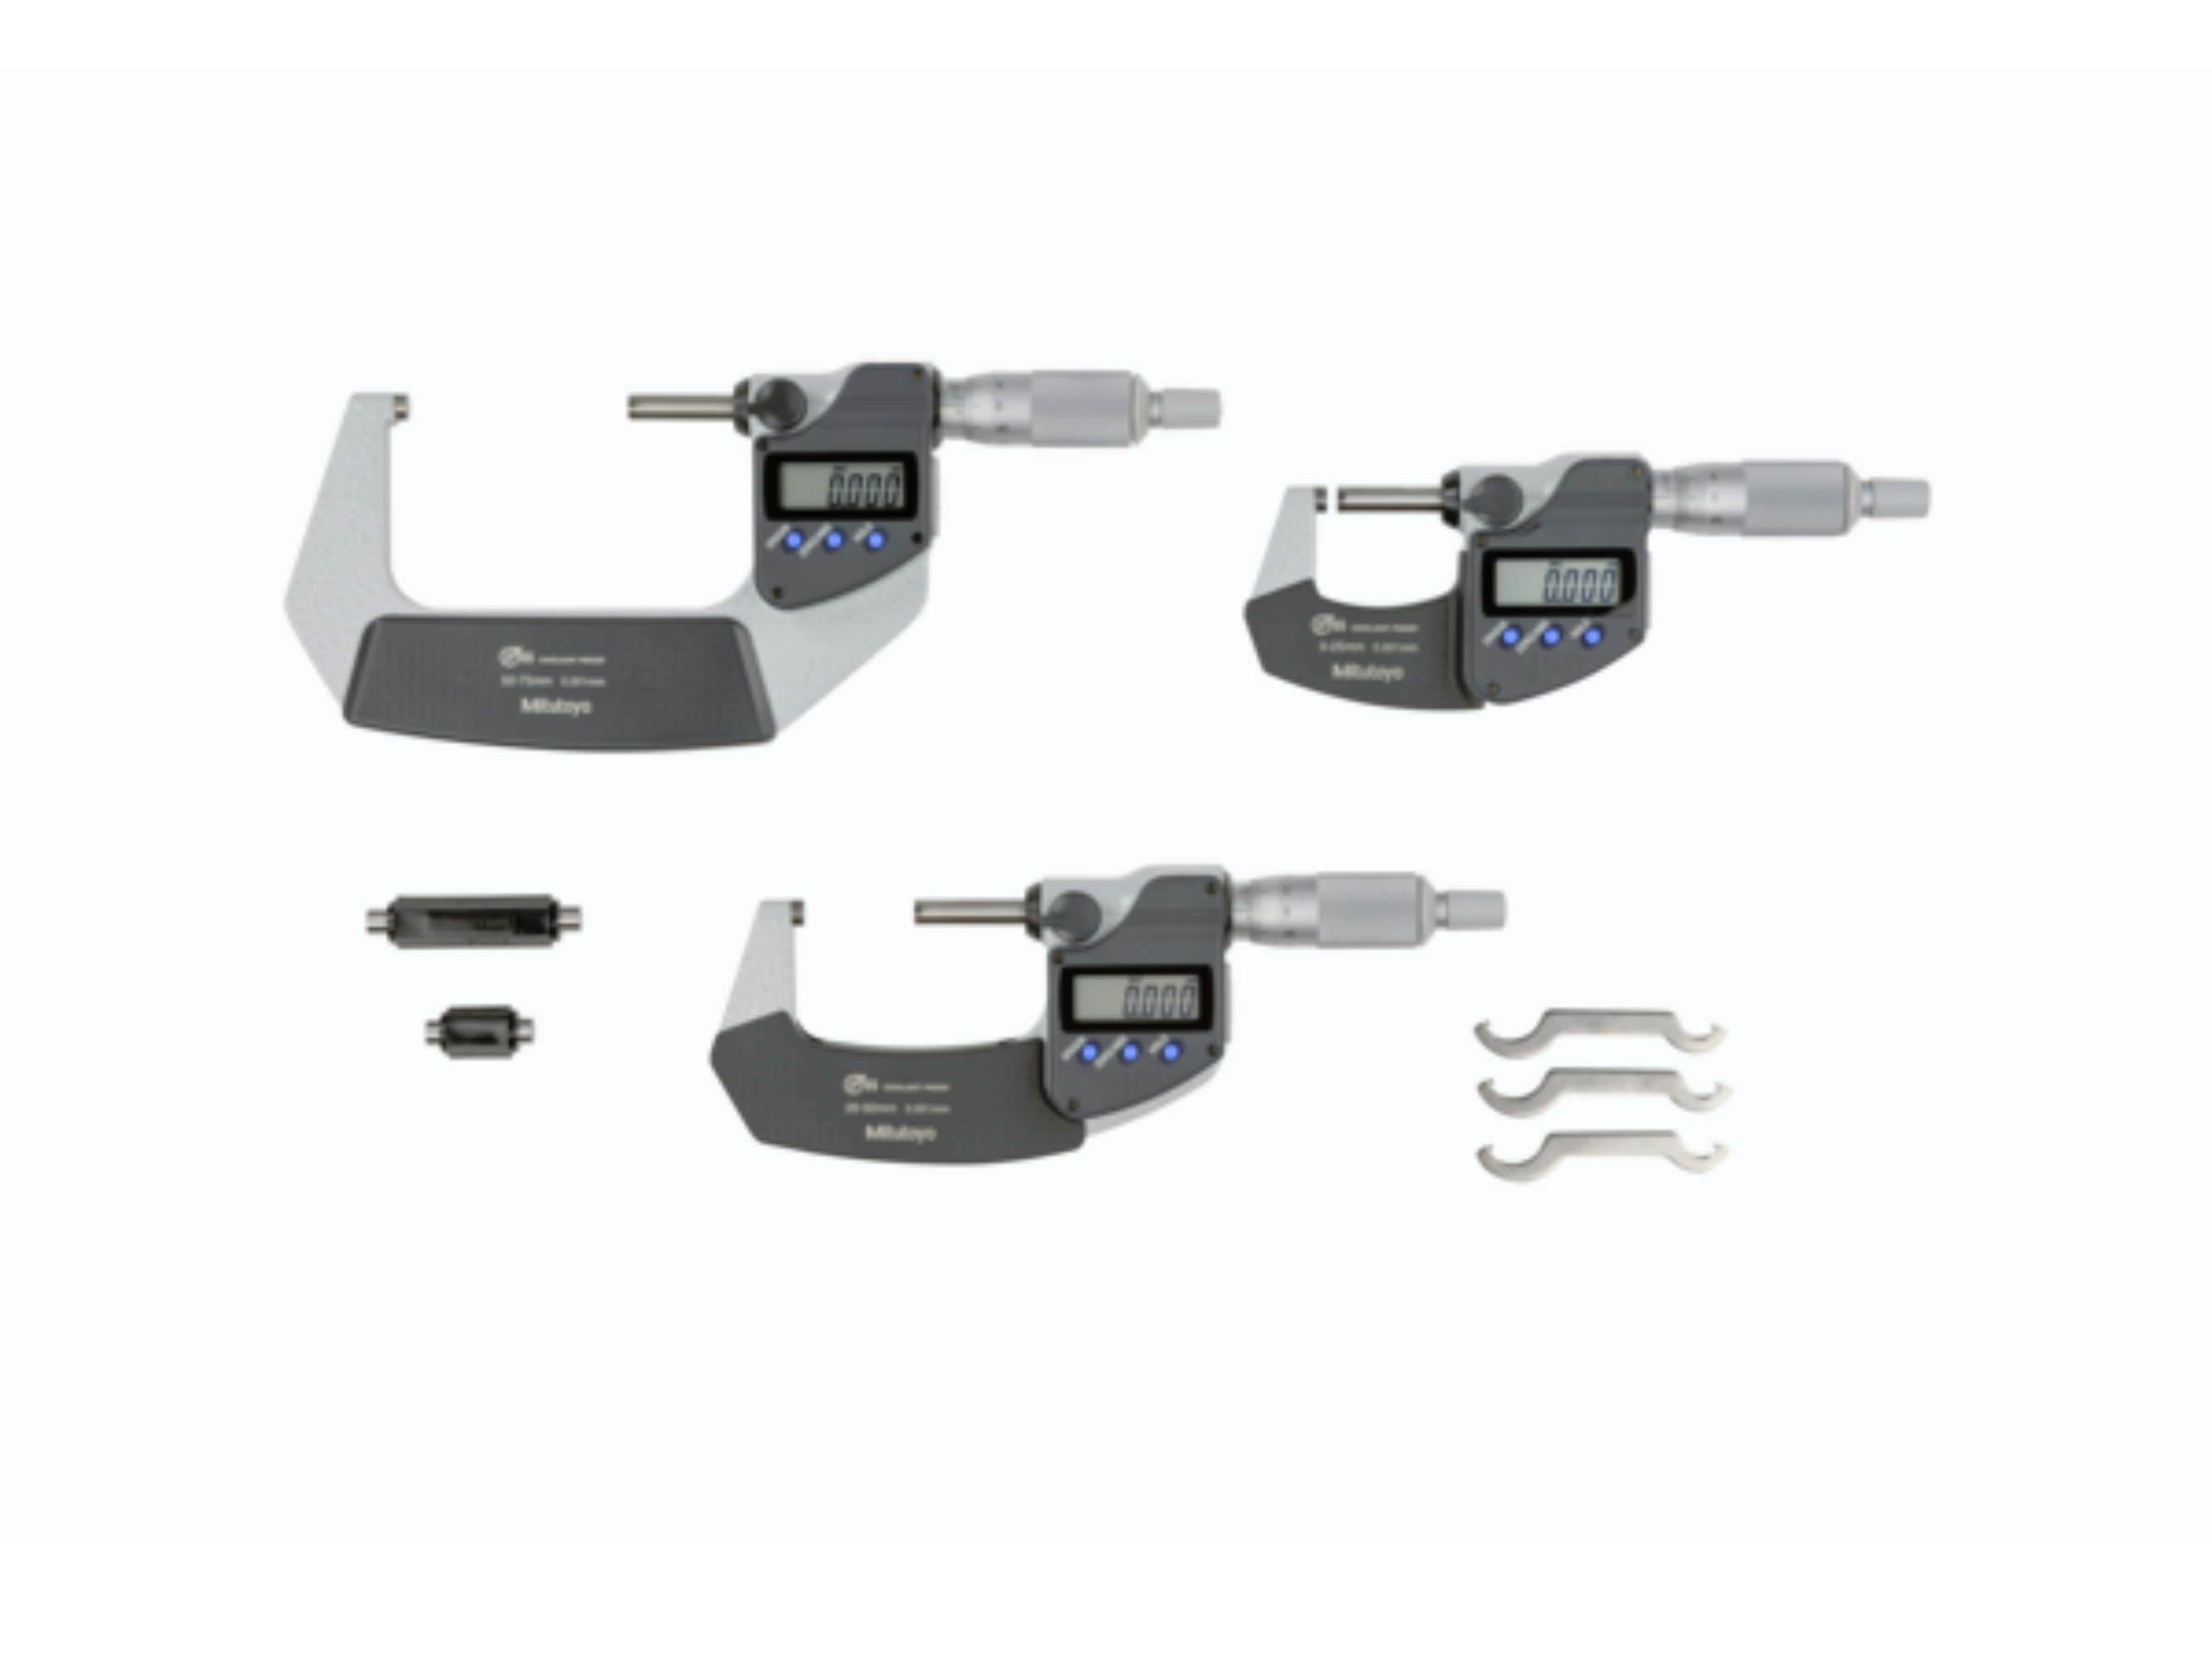 Metric Digimatic Micrometer Set 0-75mm, IP65, Ratchet Stop, With Output, 293-962-30